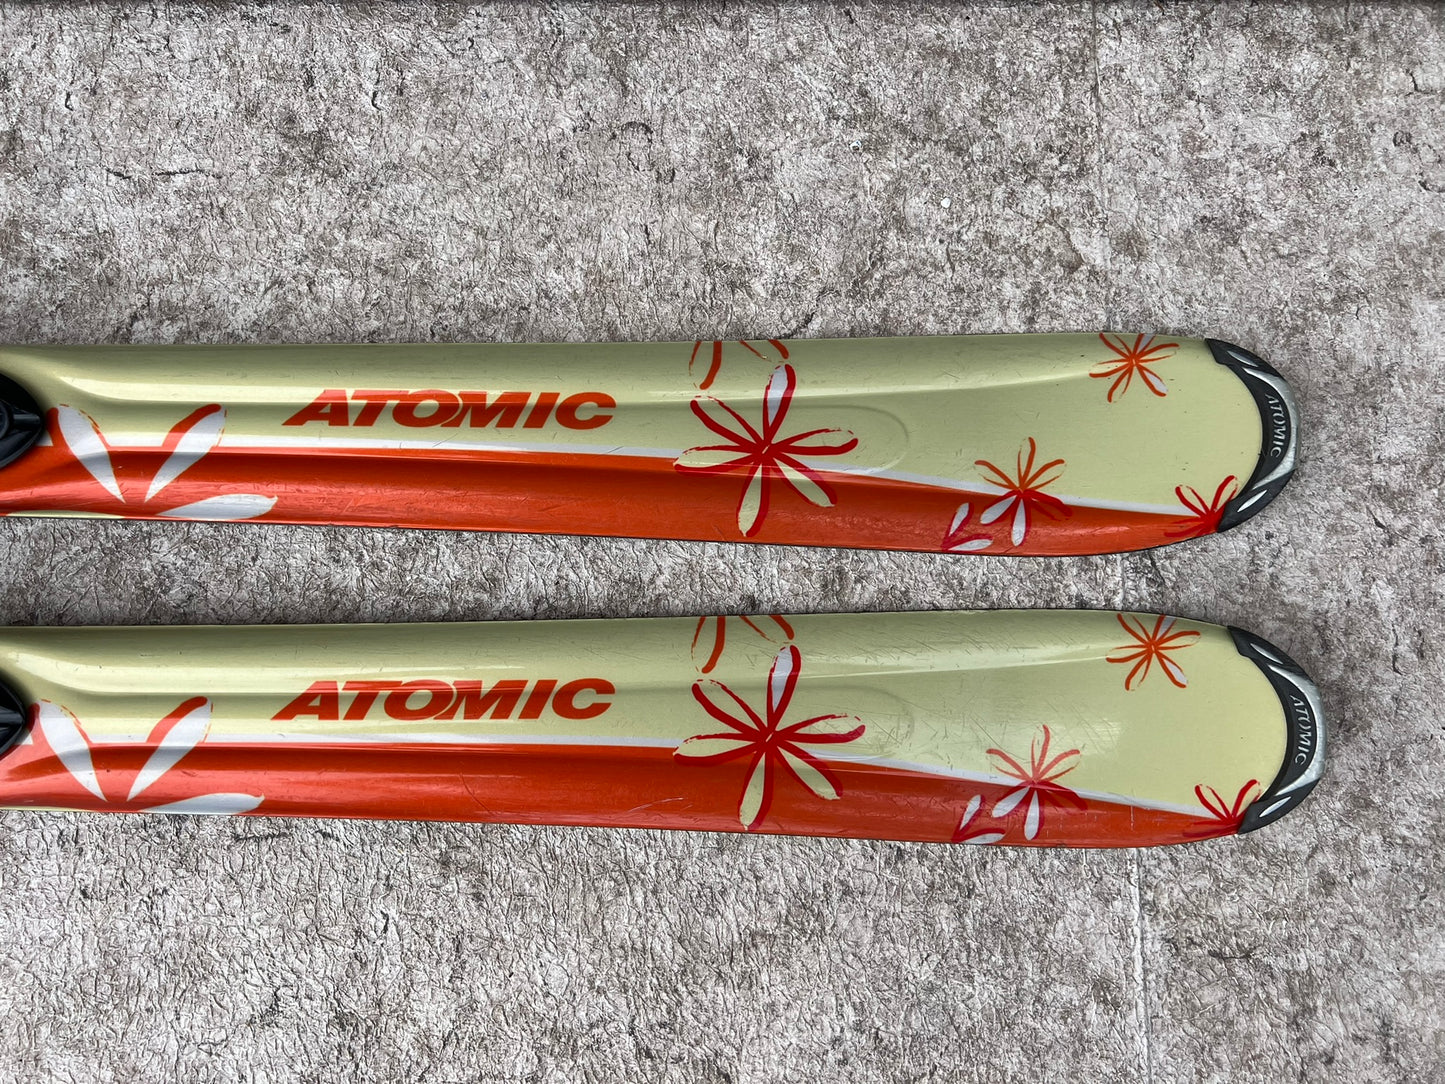 Ski 148 Atomic Balanze Peach Gold Parabolic With Bindings Excellent